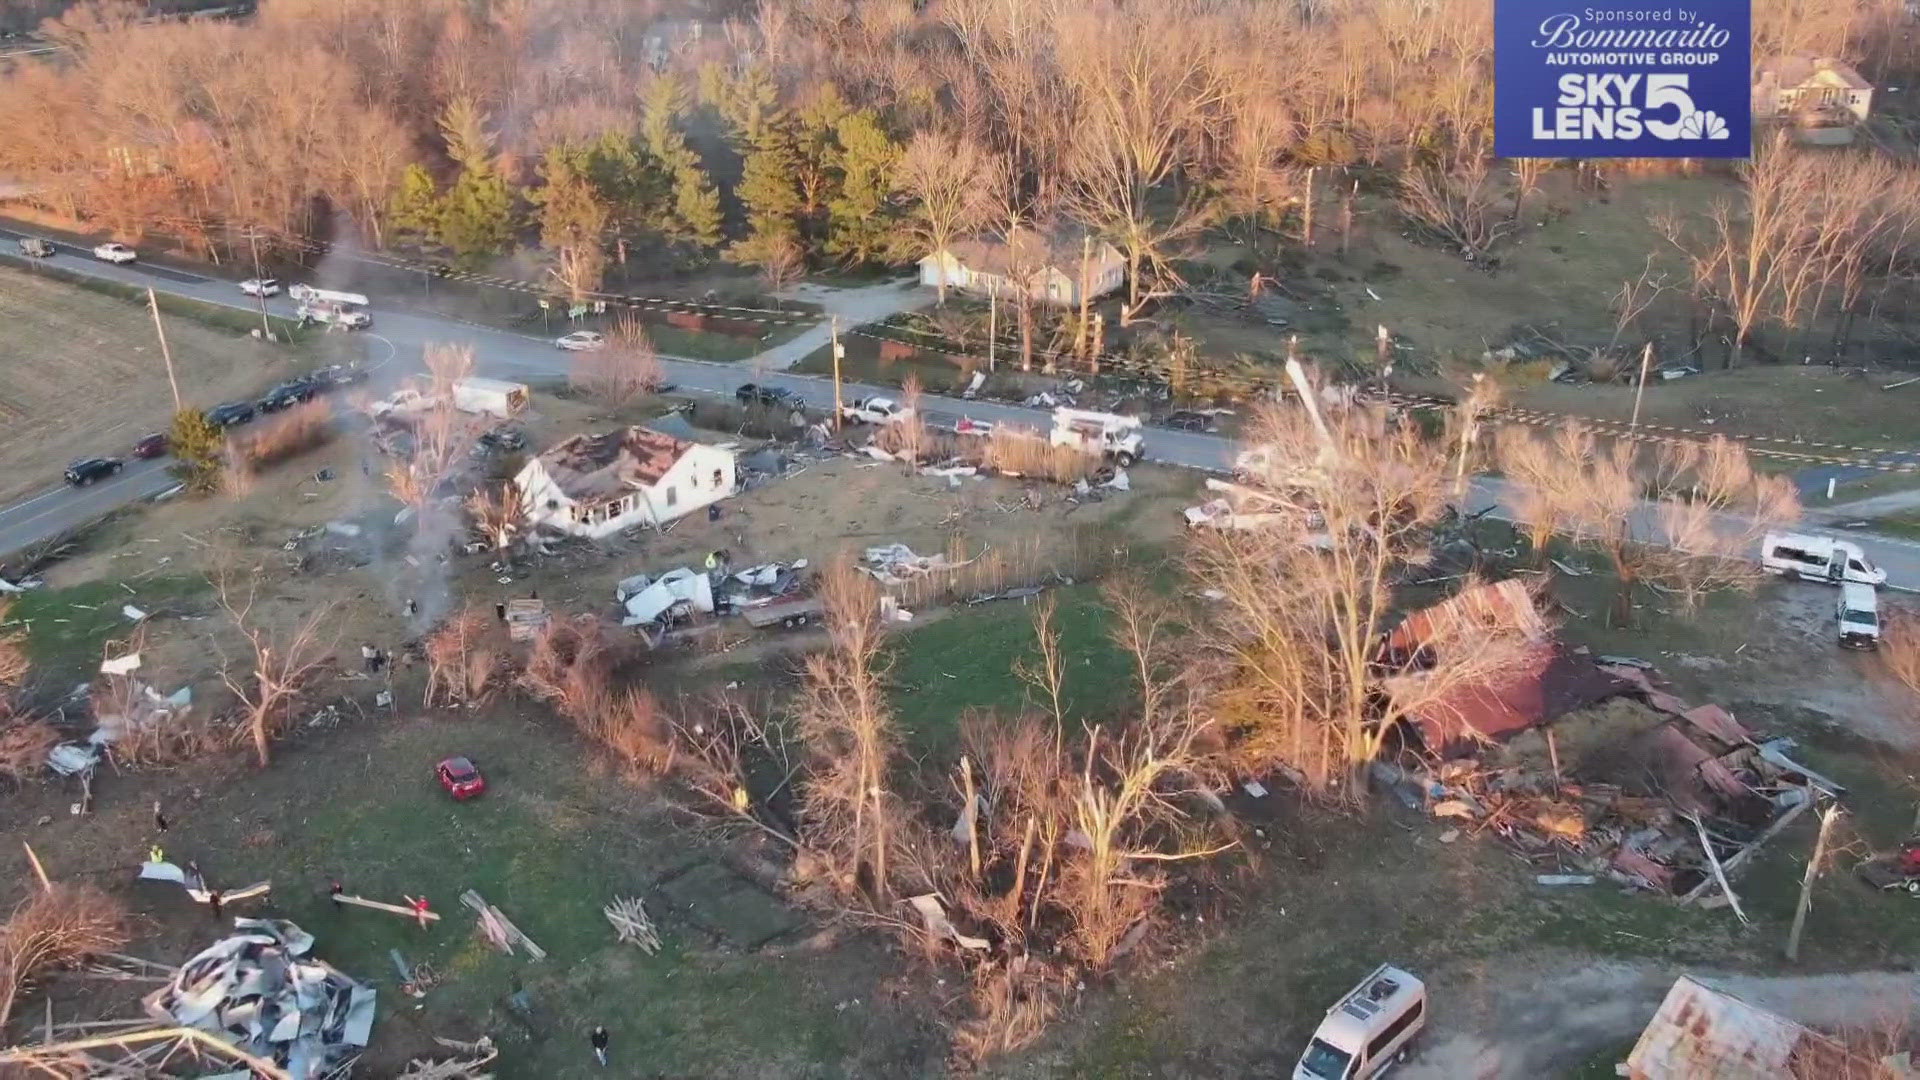 Local families impacted by severe weather and tornados speak out in the wake of possibly hazardous storms Wednesday. Here's what they said, voicing concerns.